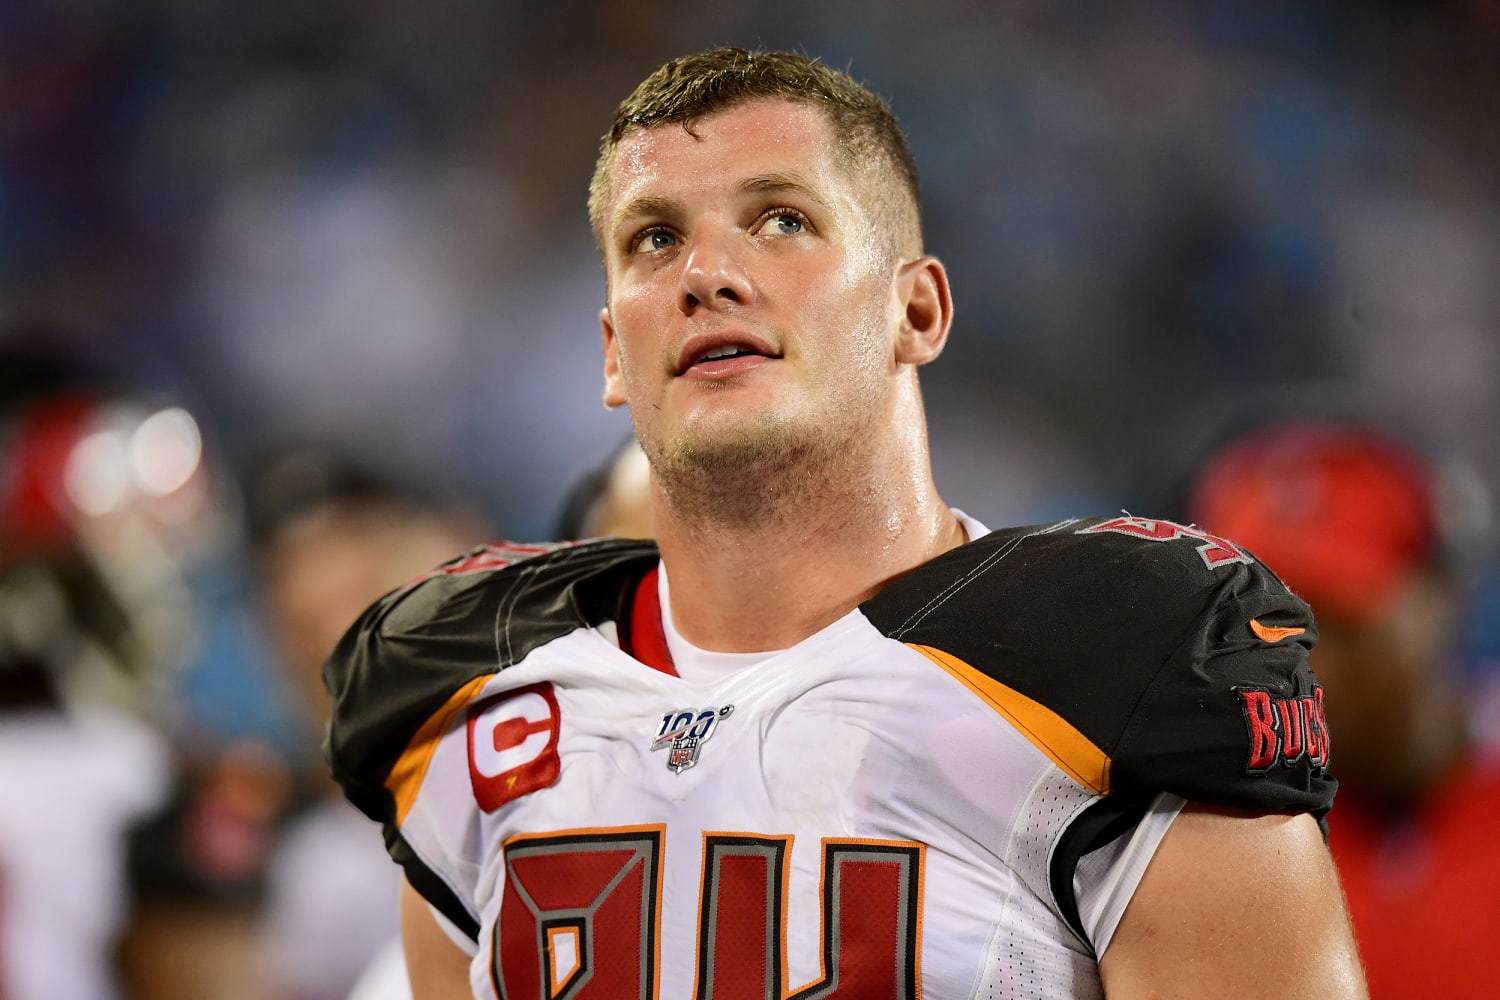 Carl Nassib, first openly gay player to play in NFL games